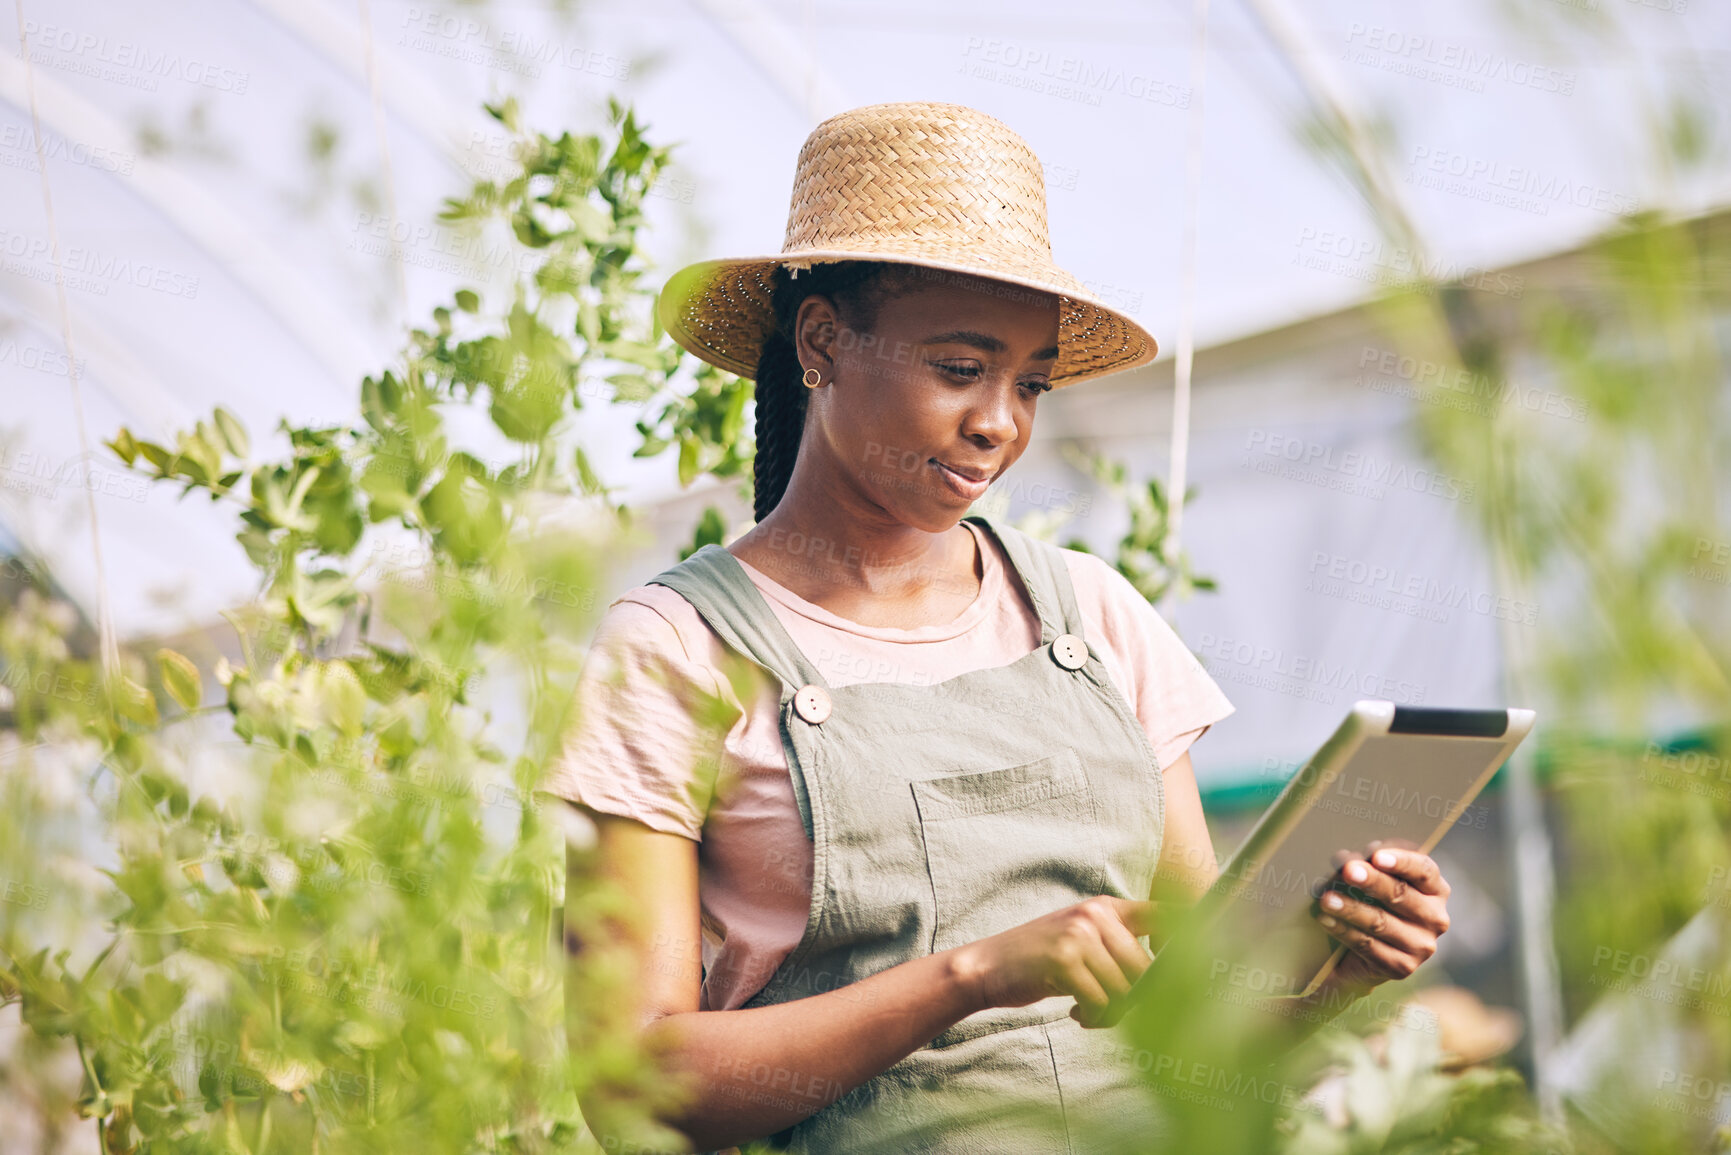 Buy stock photo Gardening, research on tablet and black woman on farm checking internet website for information on plants. Nature, technology and farmer with digital app for sustainability, agriculture and analysis.